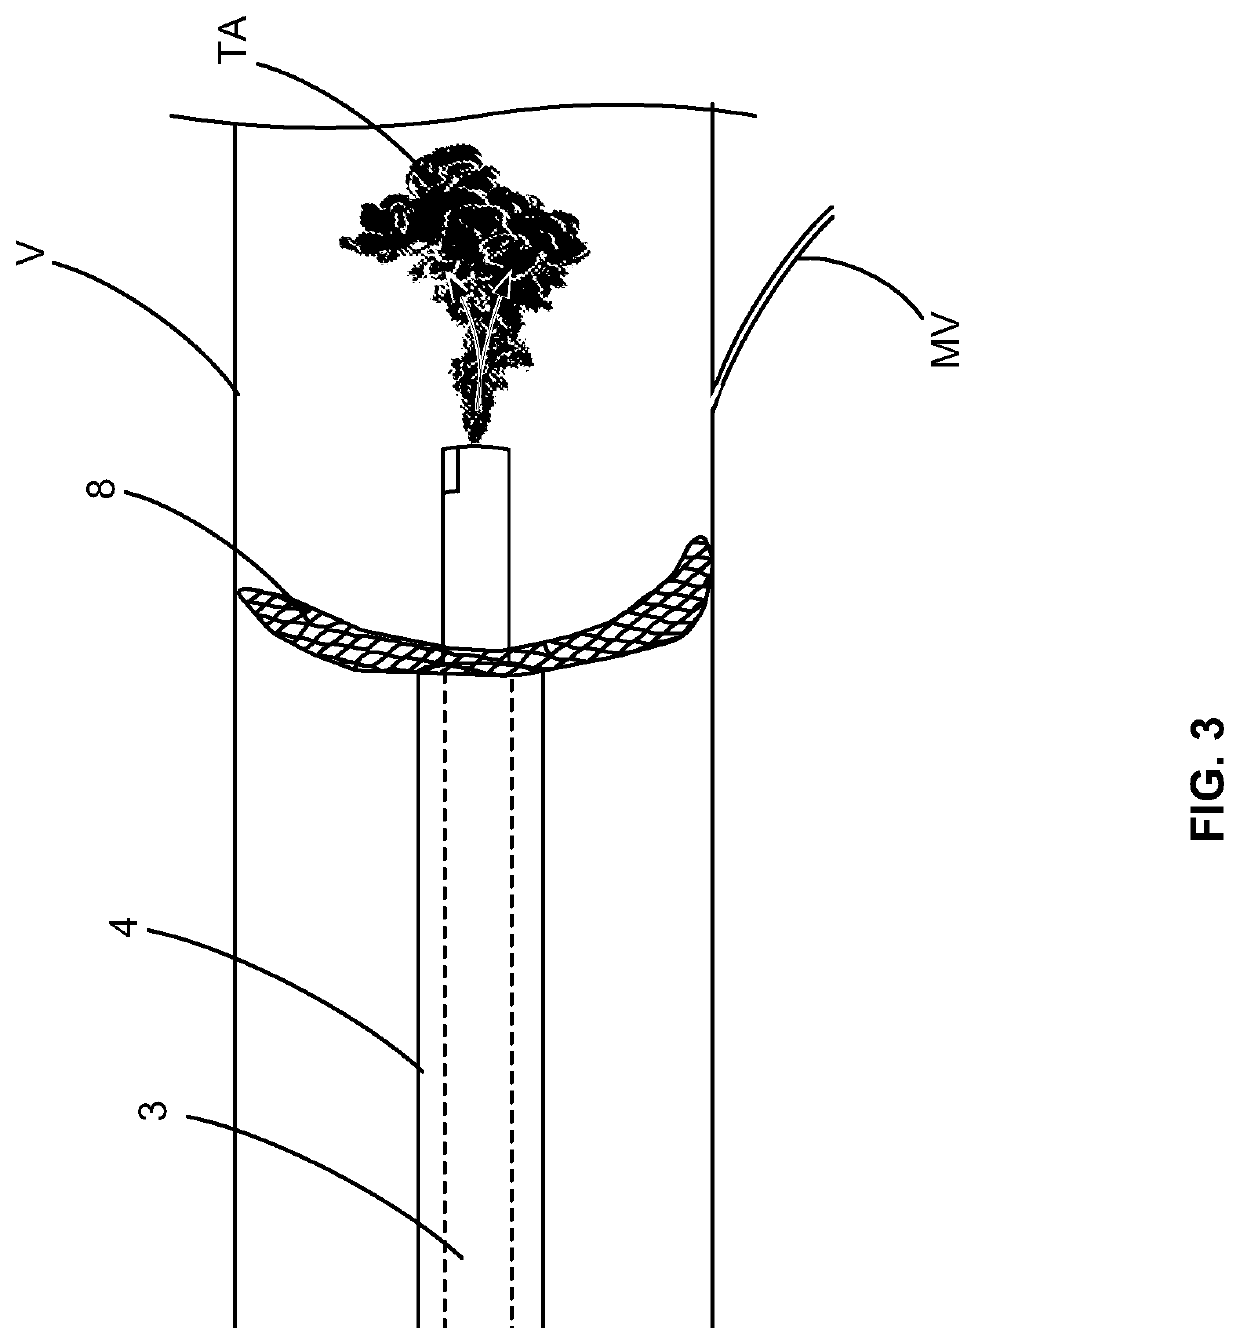 Sensor device and methods of operation for a catheter based treatment of myocardial microvascular obstruction